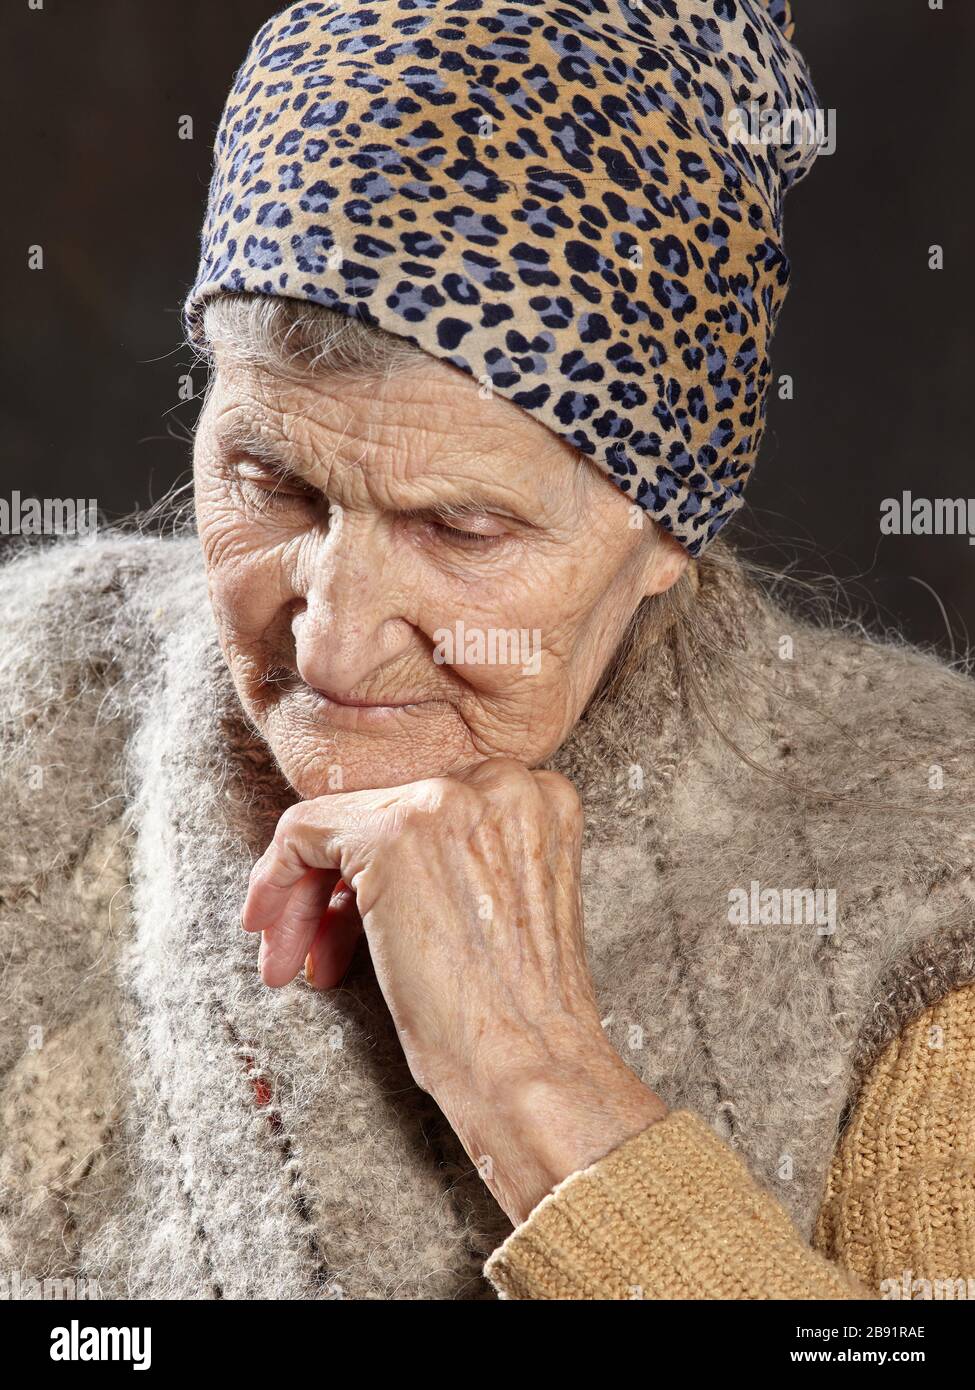 Close-up portrait of old woman with brooding look on dark background. She leaned her chin on her hand and deeply thought. Stock Photo